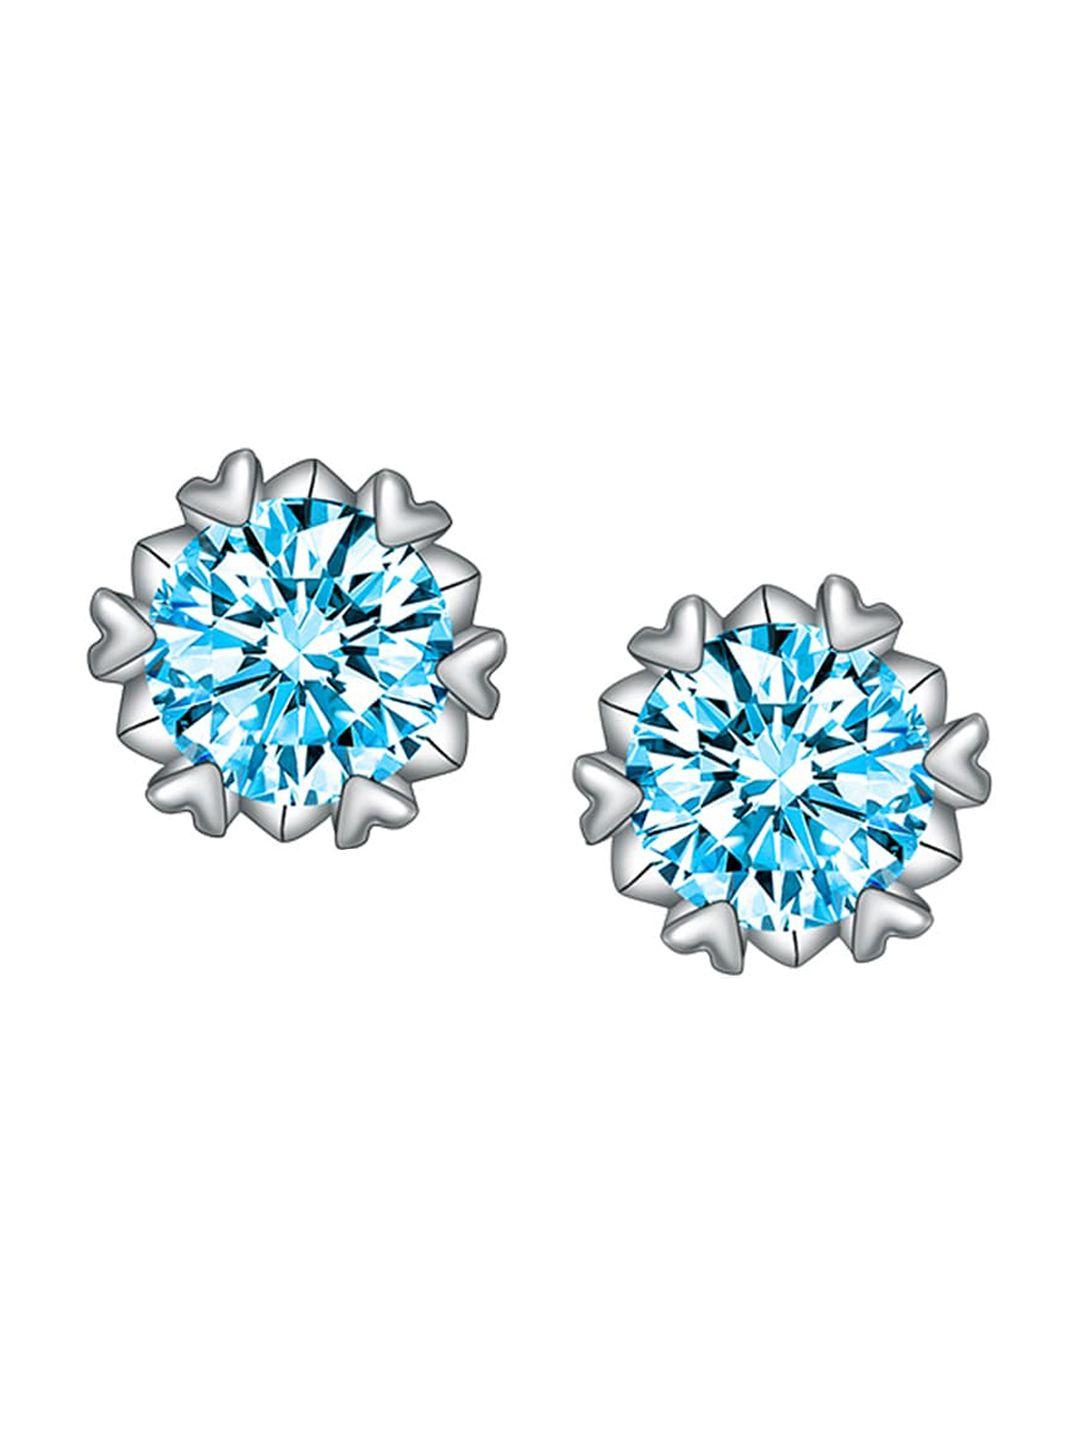 designs & you floral studs earrings